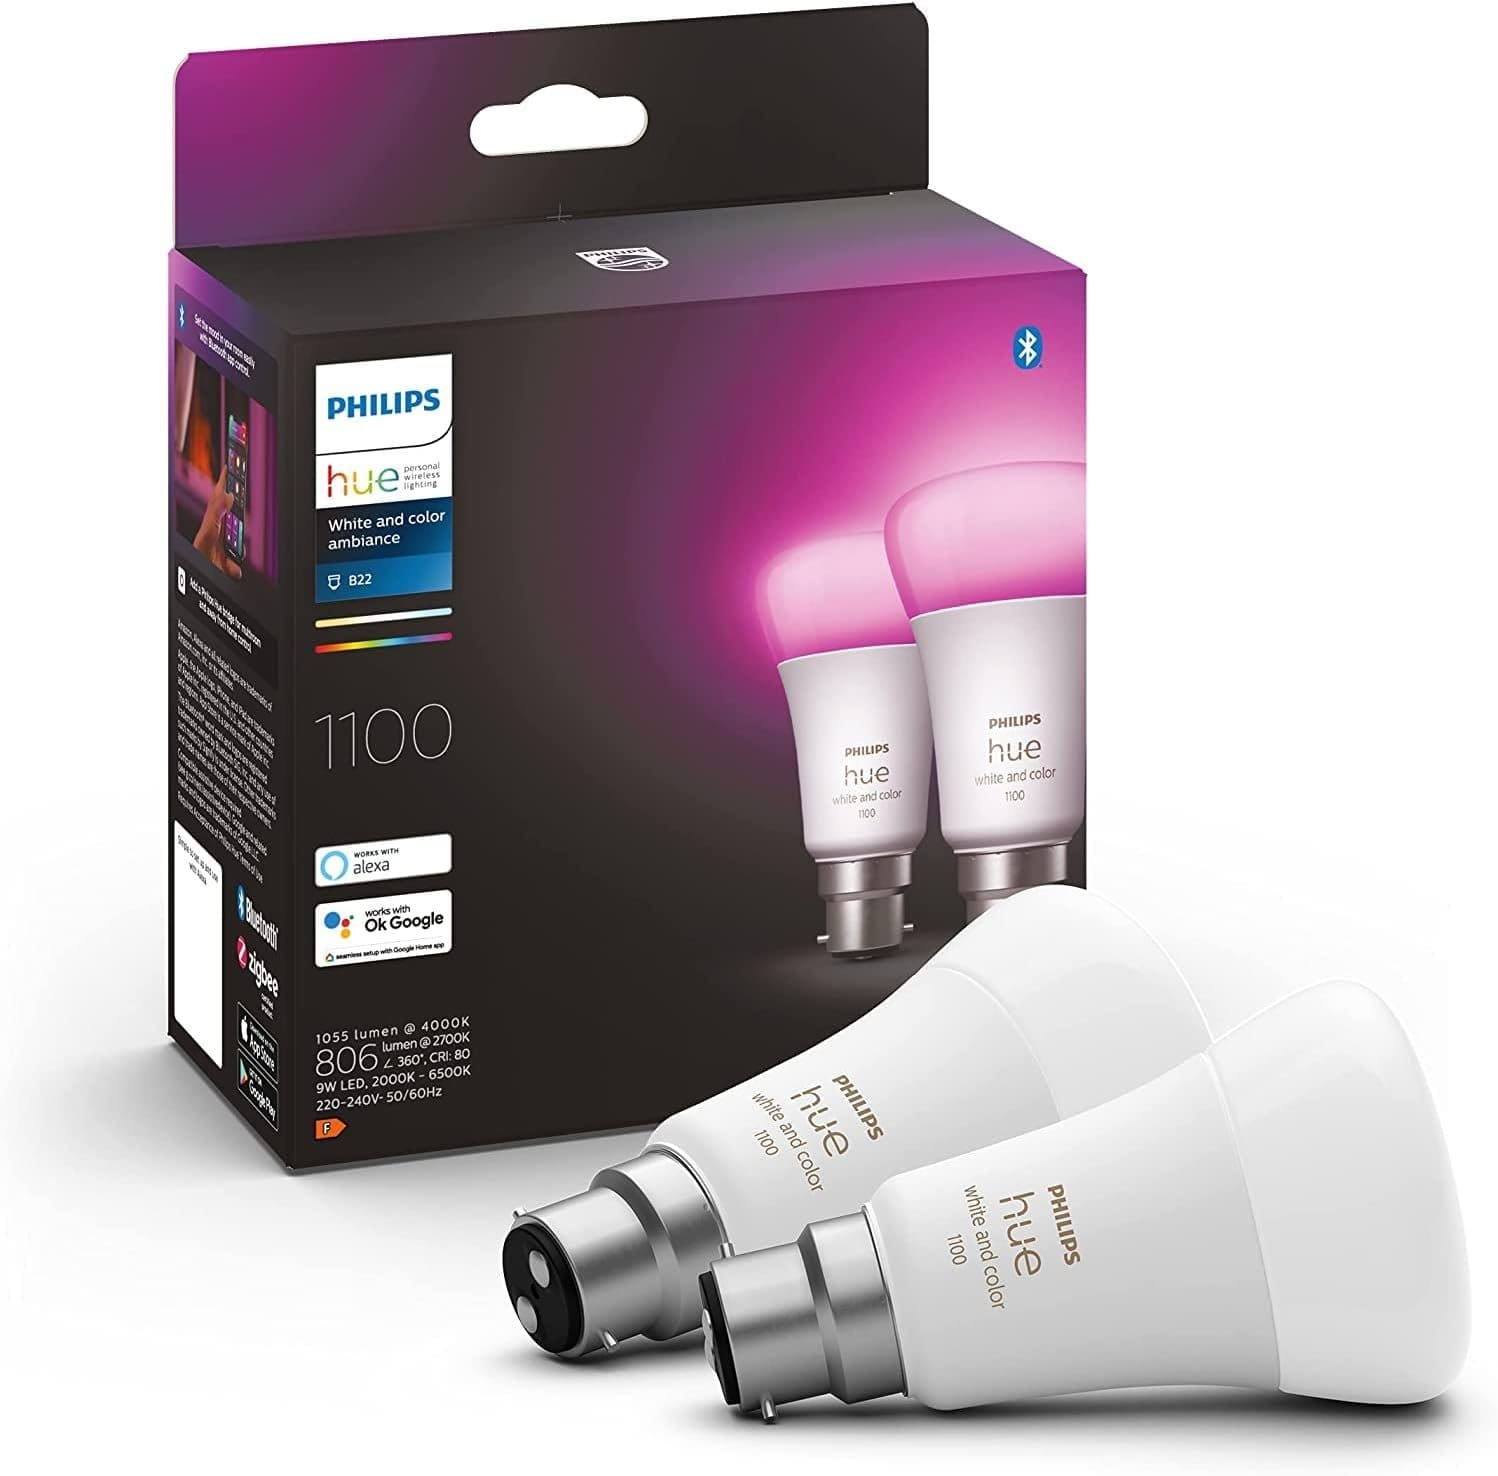 Philips Hue Smart Bulb Twin Pack LED Review